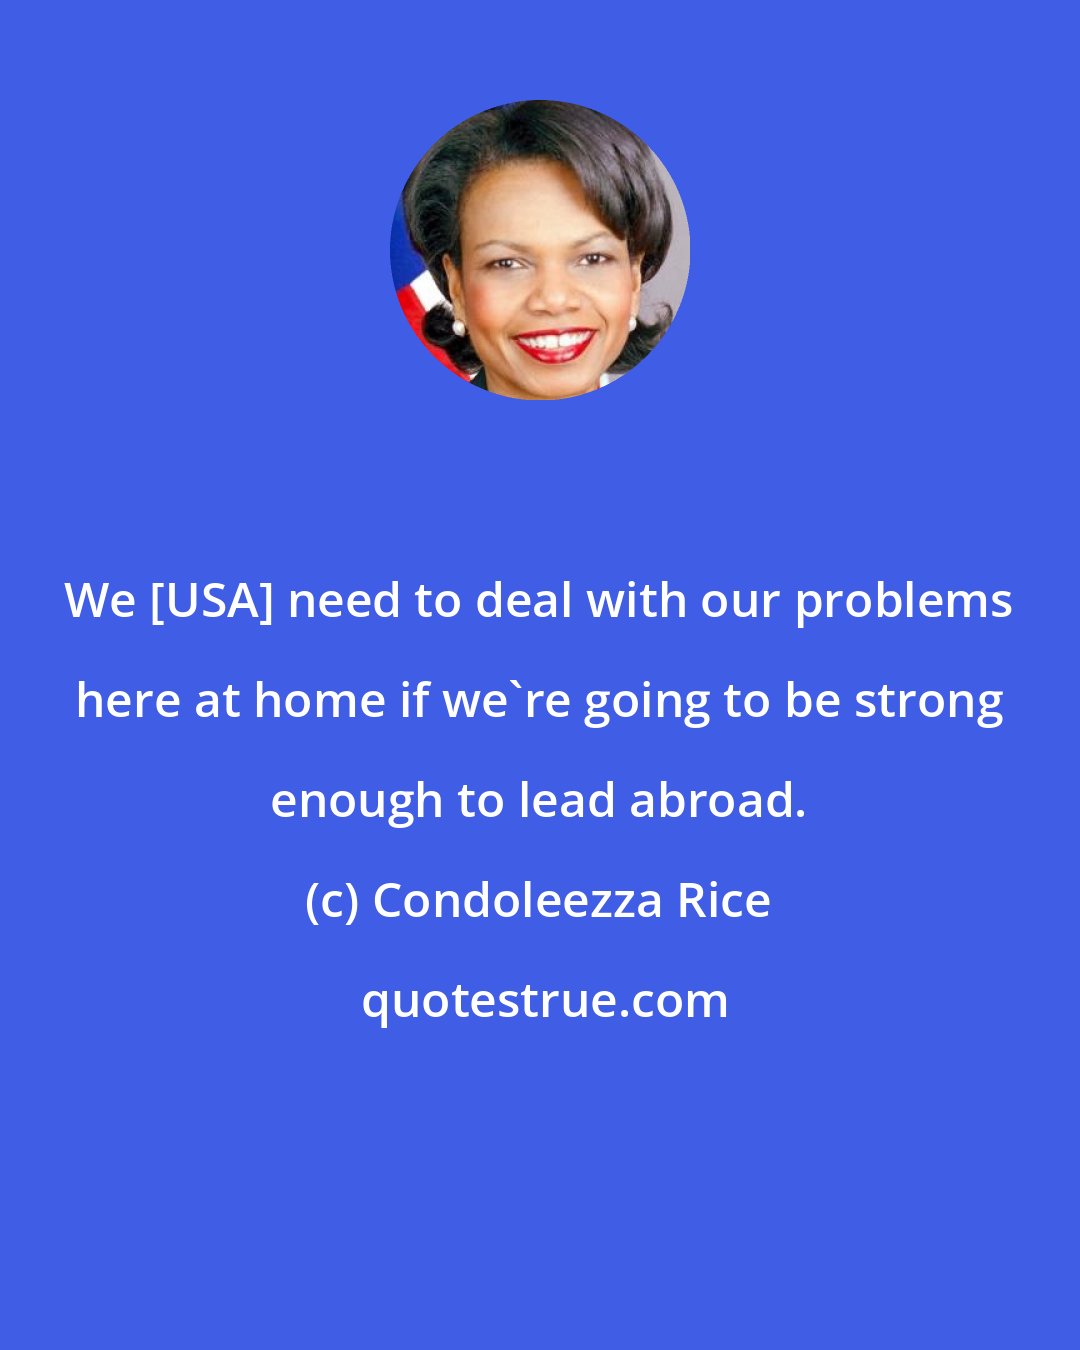 Condoleezza Rice: We [USA] need to deal with our problems here at home if we're going to be strong enough to lead abroad.